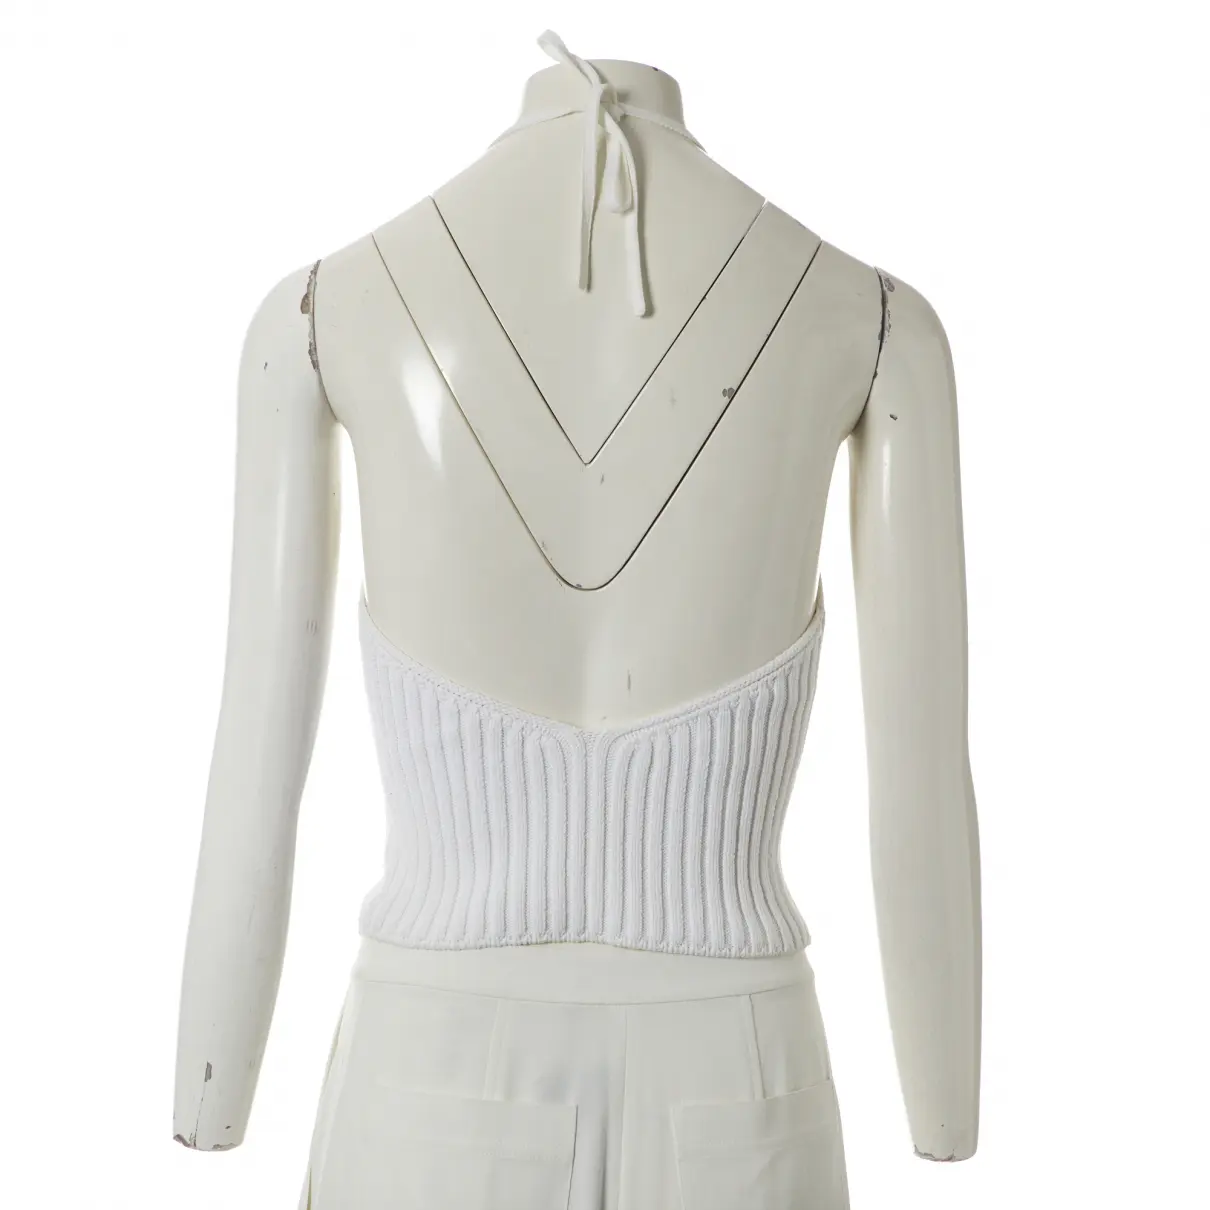 Buy Chanel White Cotton Top online